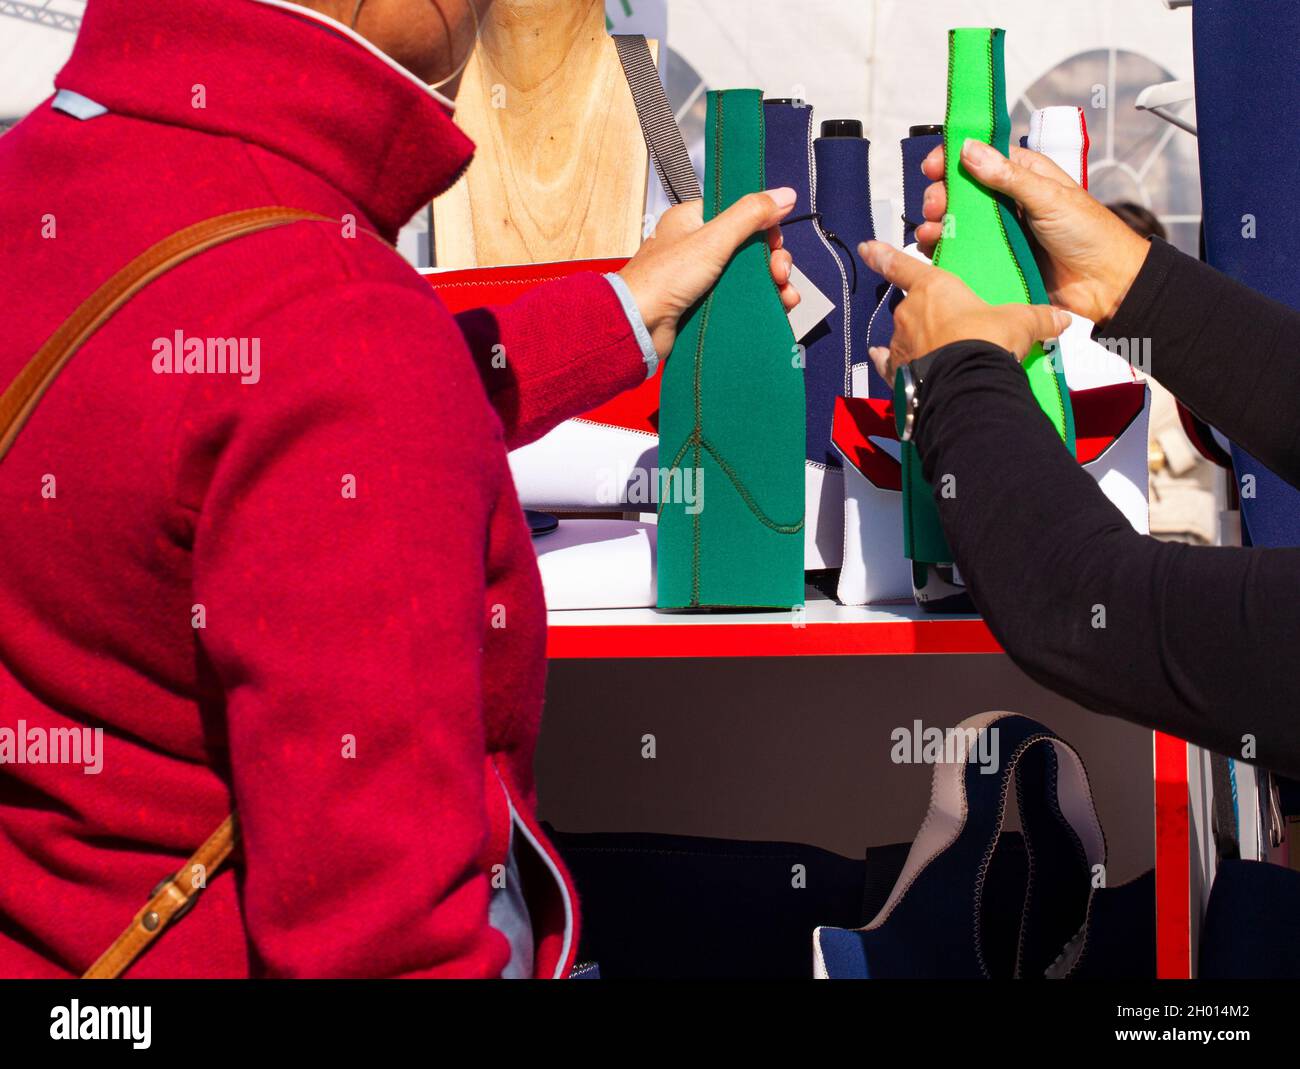 Woman with a red jacket buying a neoprene bottle in a specialized shop Stock Photo